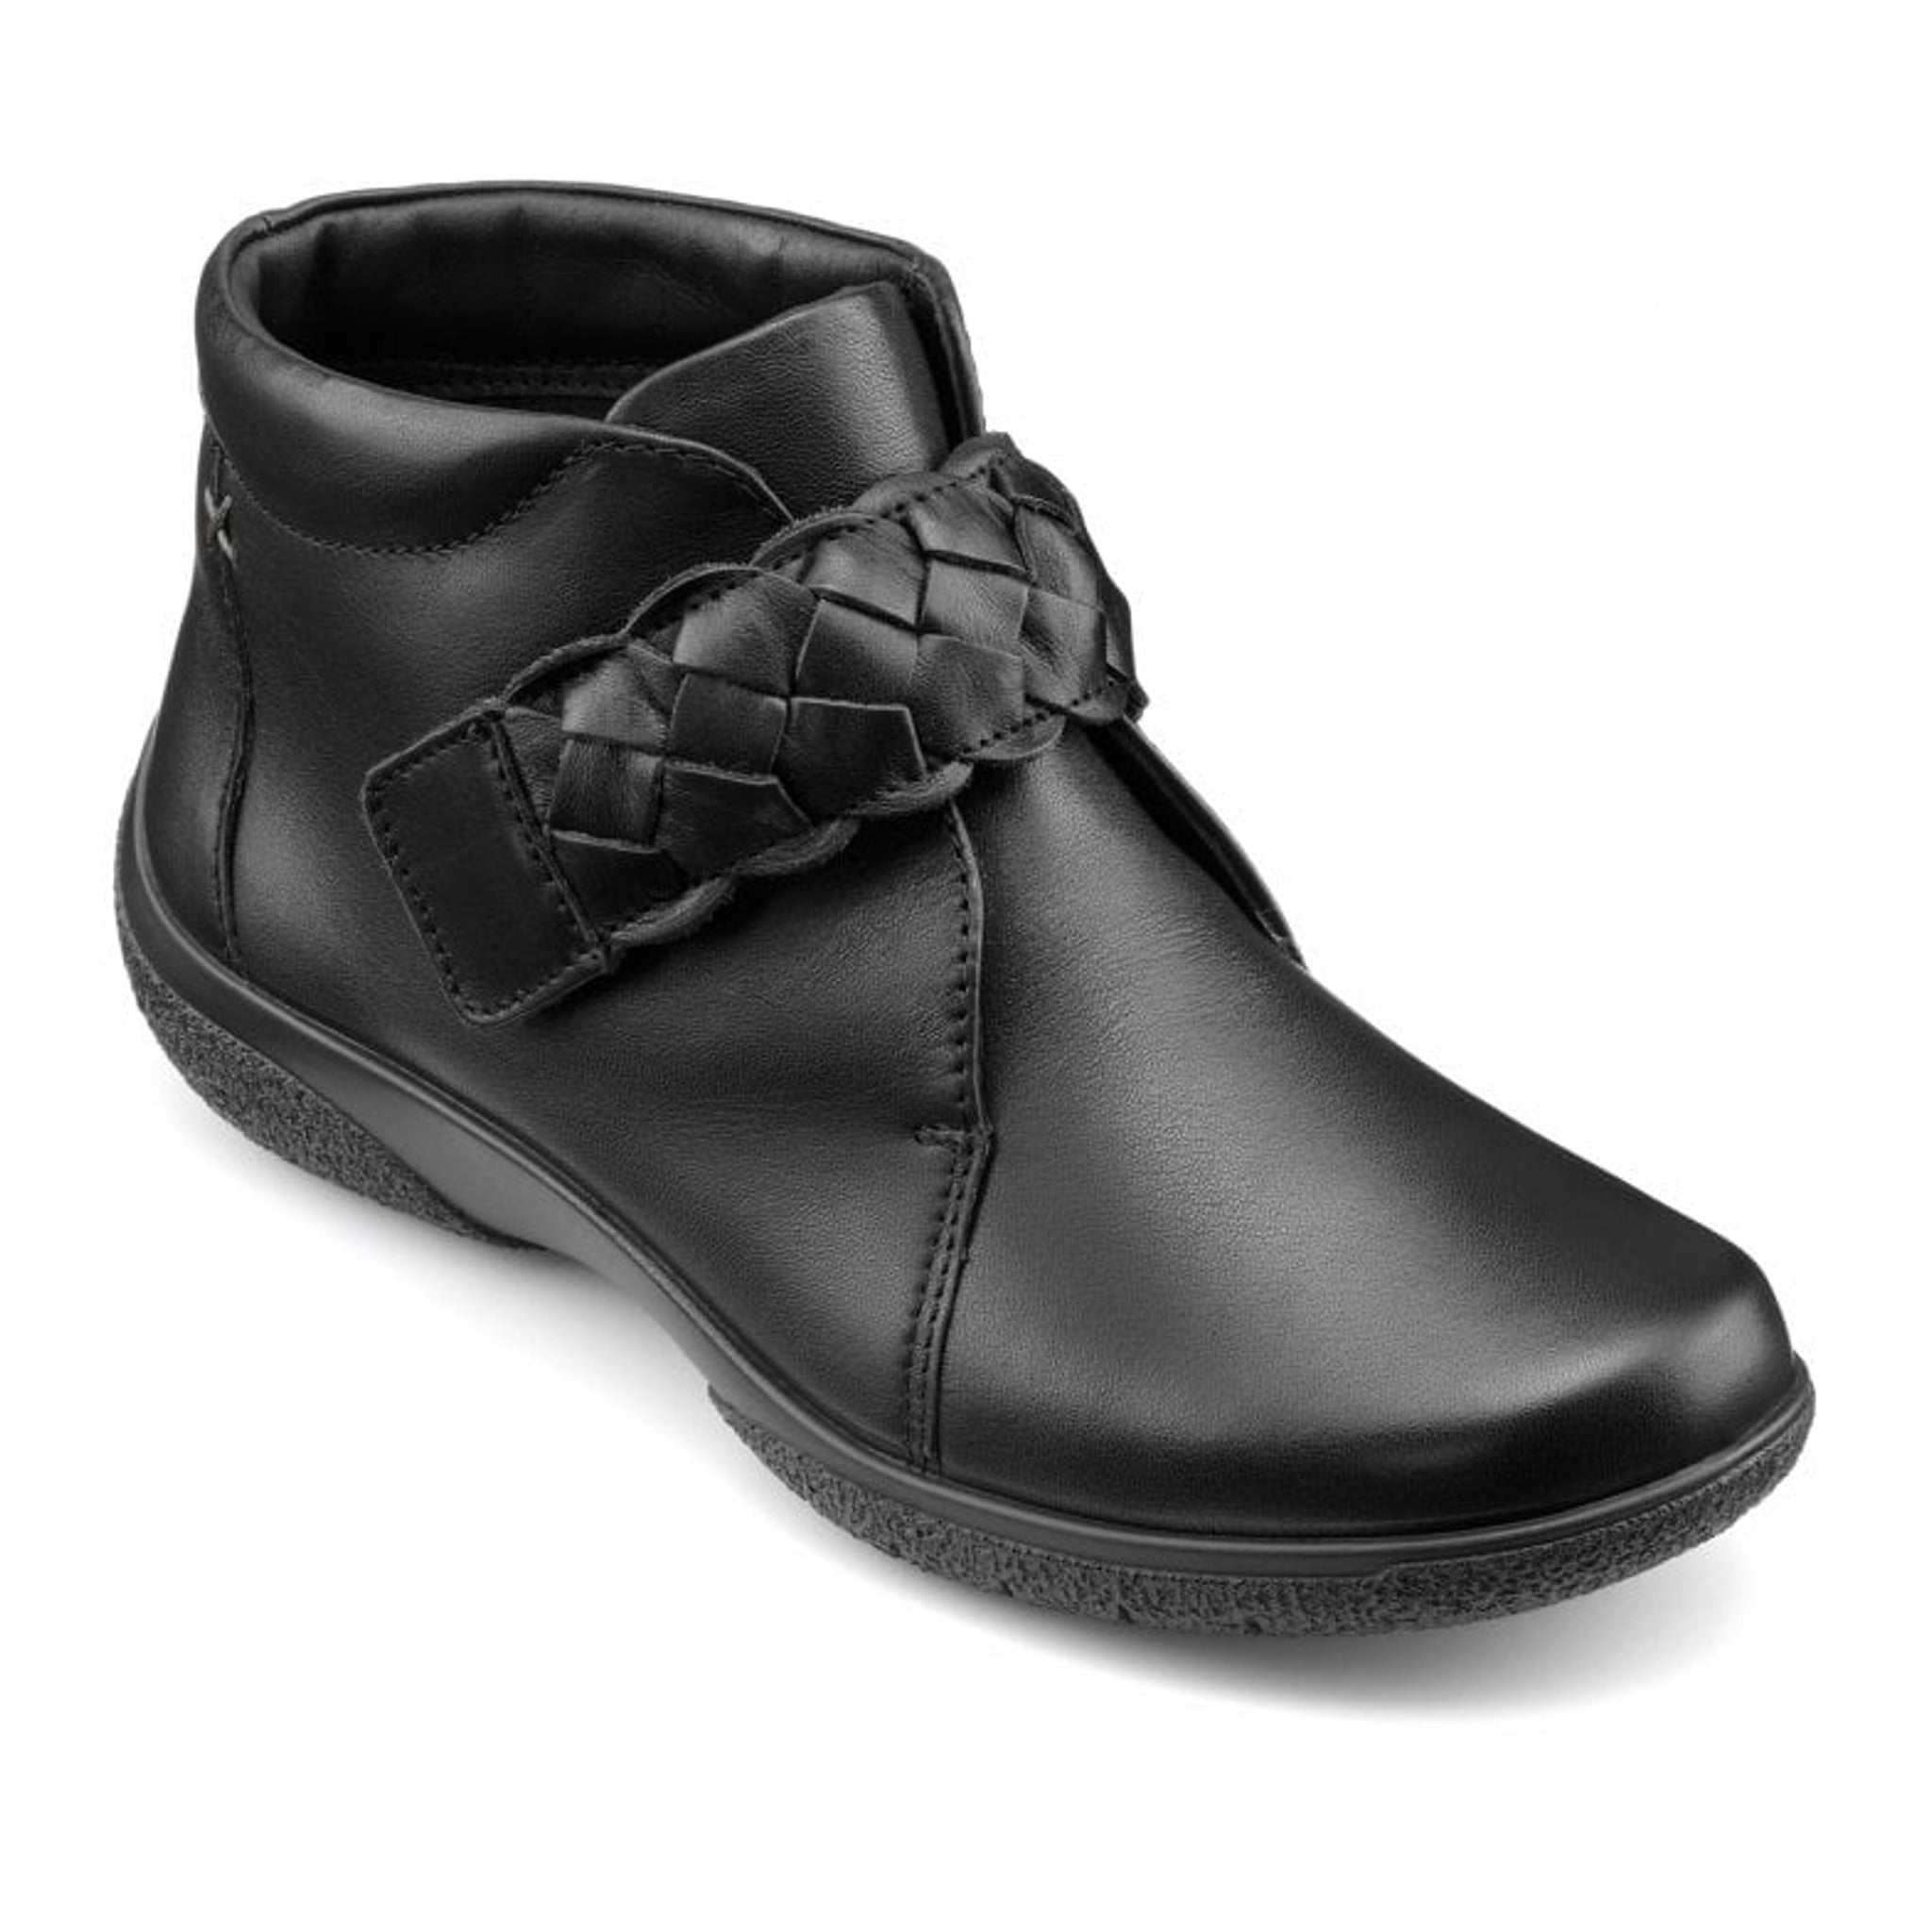 HOTTER DAYDREAM Boots - Wide EXF Fit